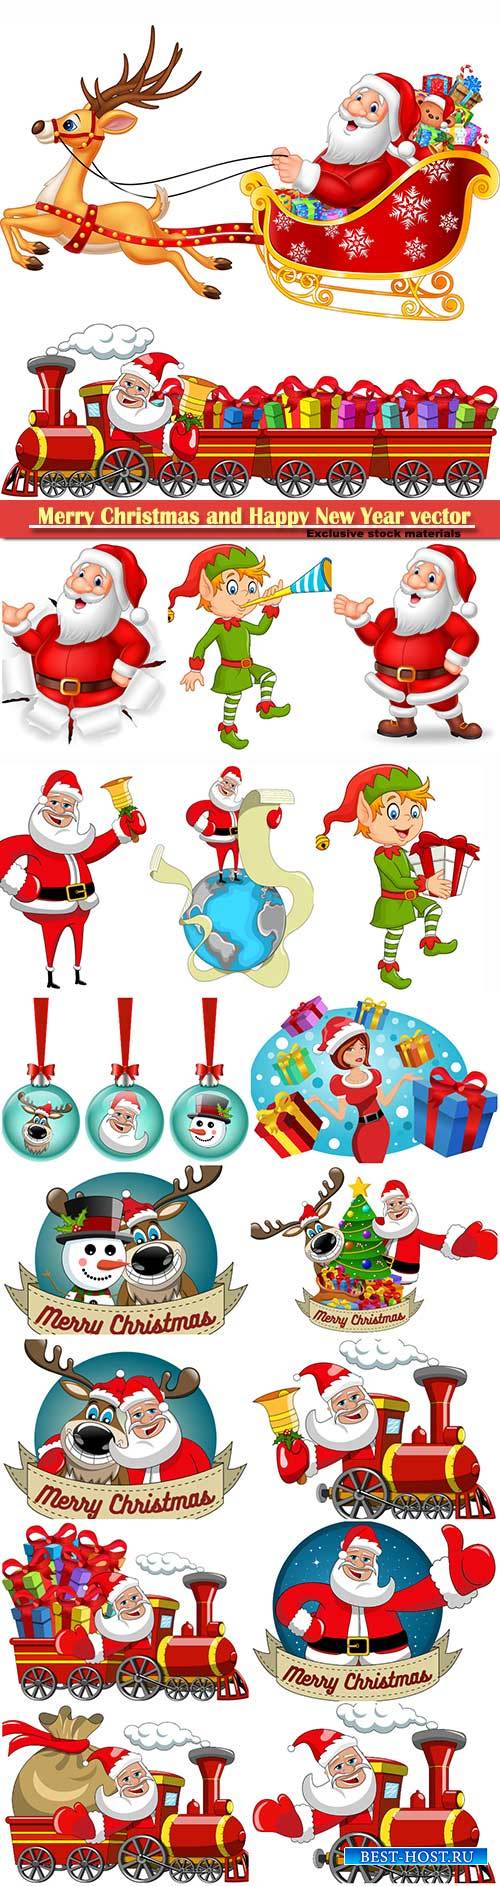 Merry Christmas and Happy New Year vector design # 16